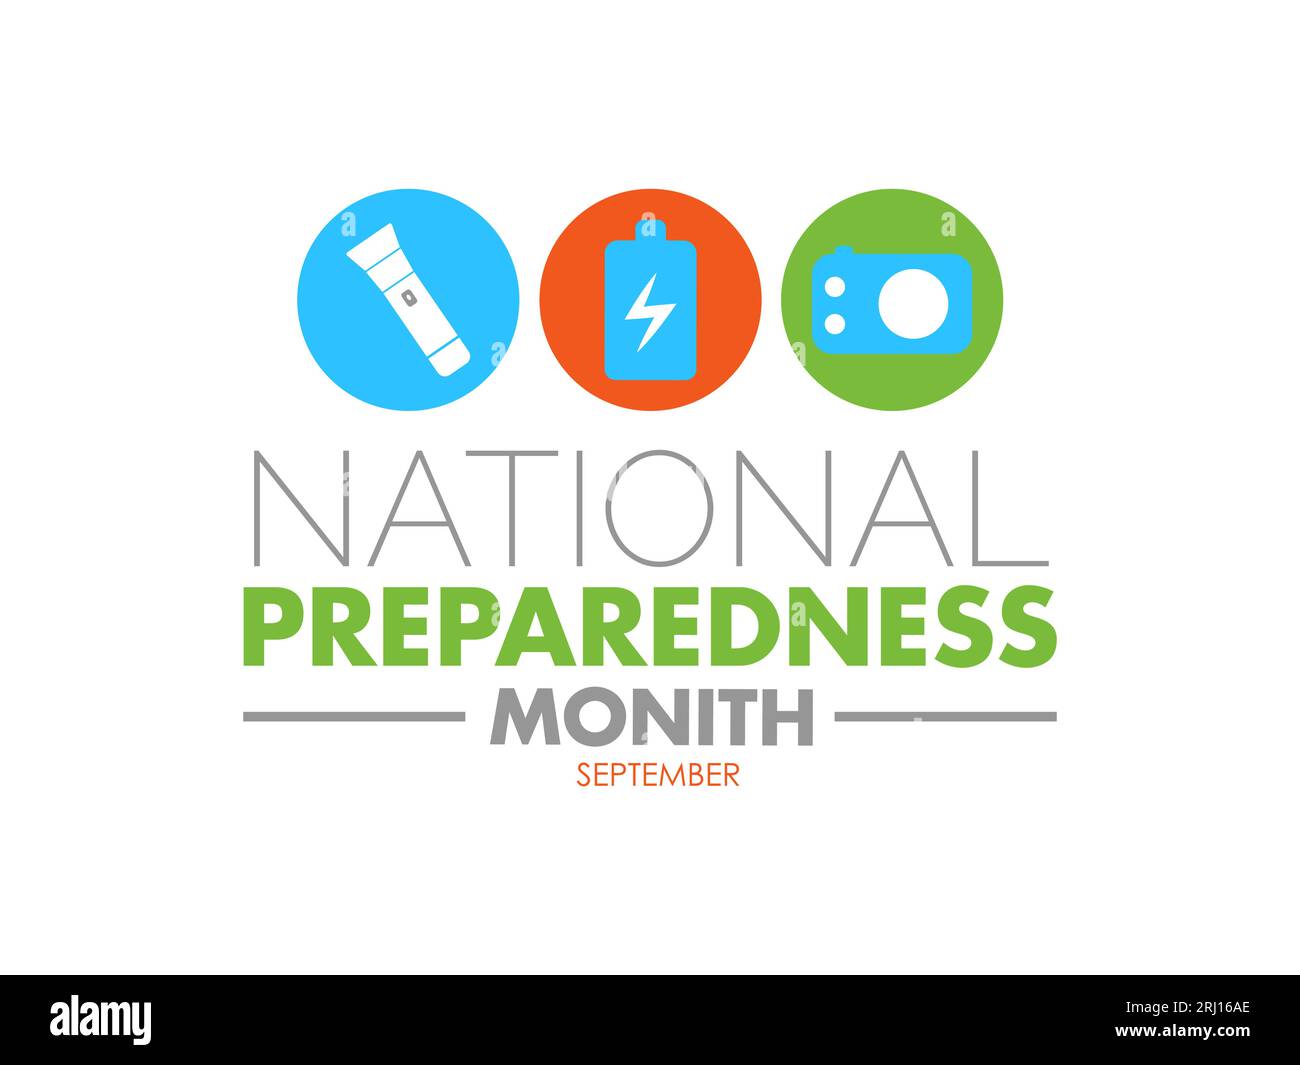 National Preparedness Month Promotes Readiness, Safety, and Collaboration for All Hazards. vector illustration banner template. Stock Vector